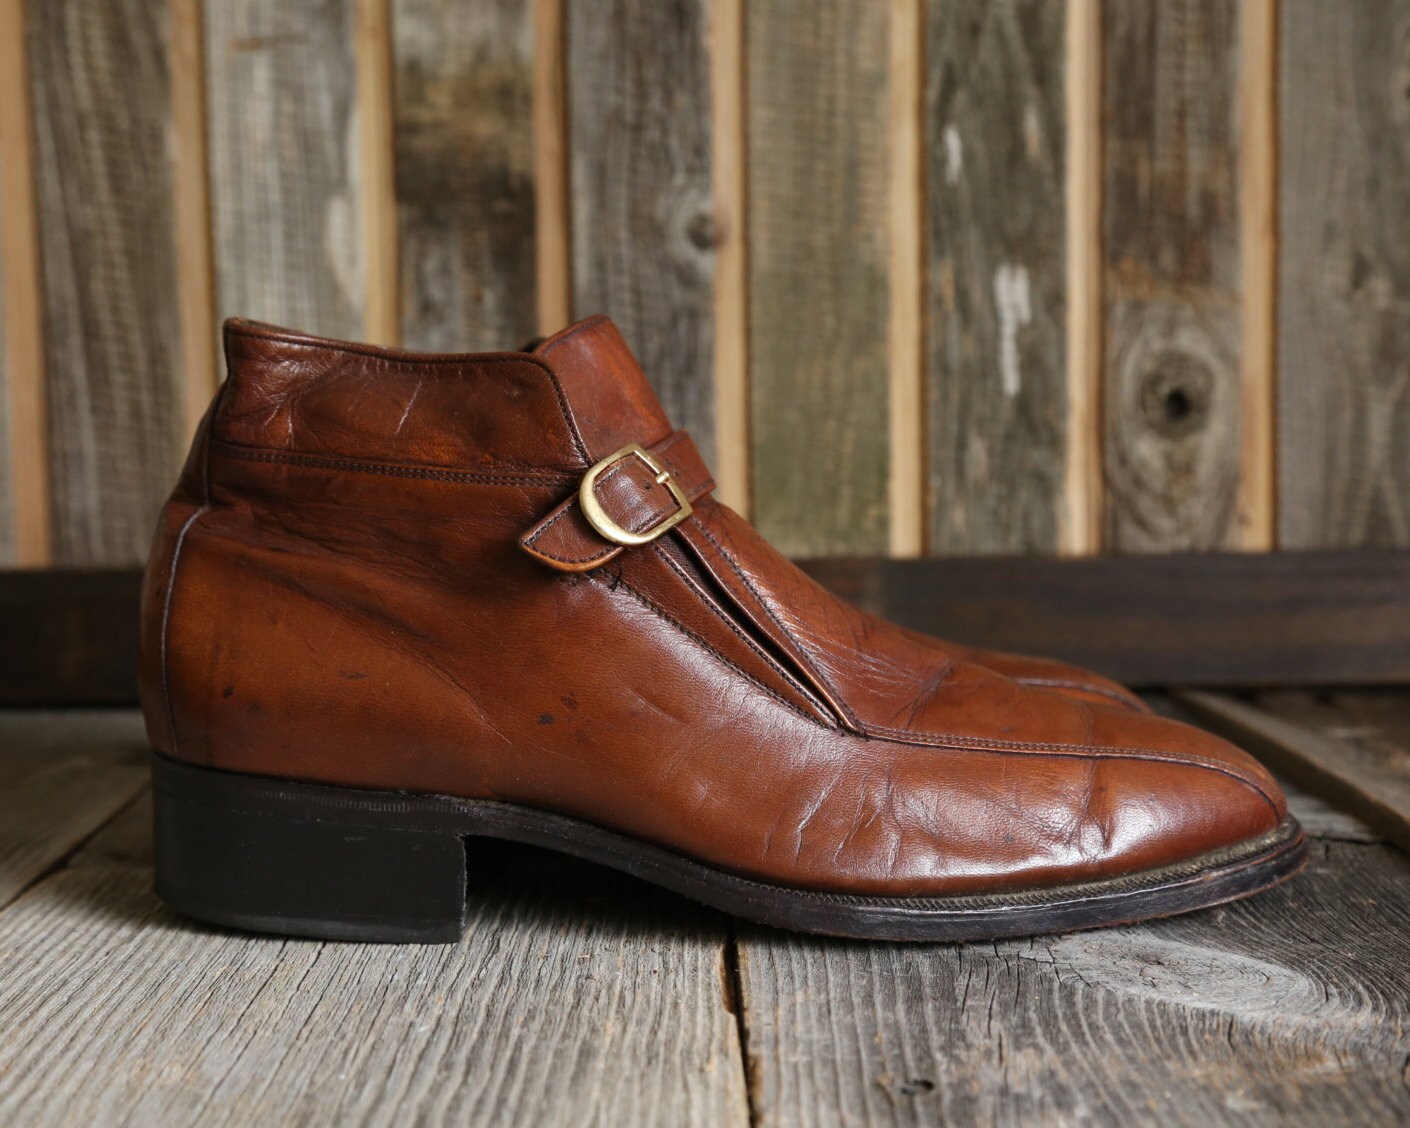 SALE Florsheim Shoes . Ankle High Beetle Boot in Brown - Etsy